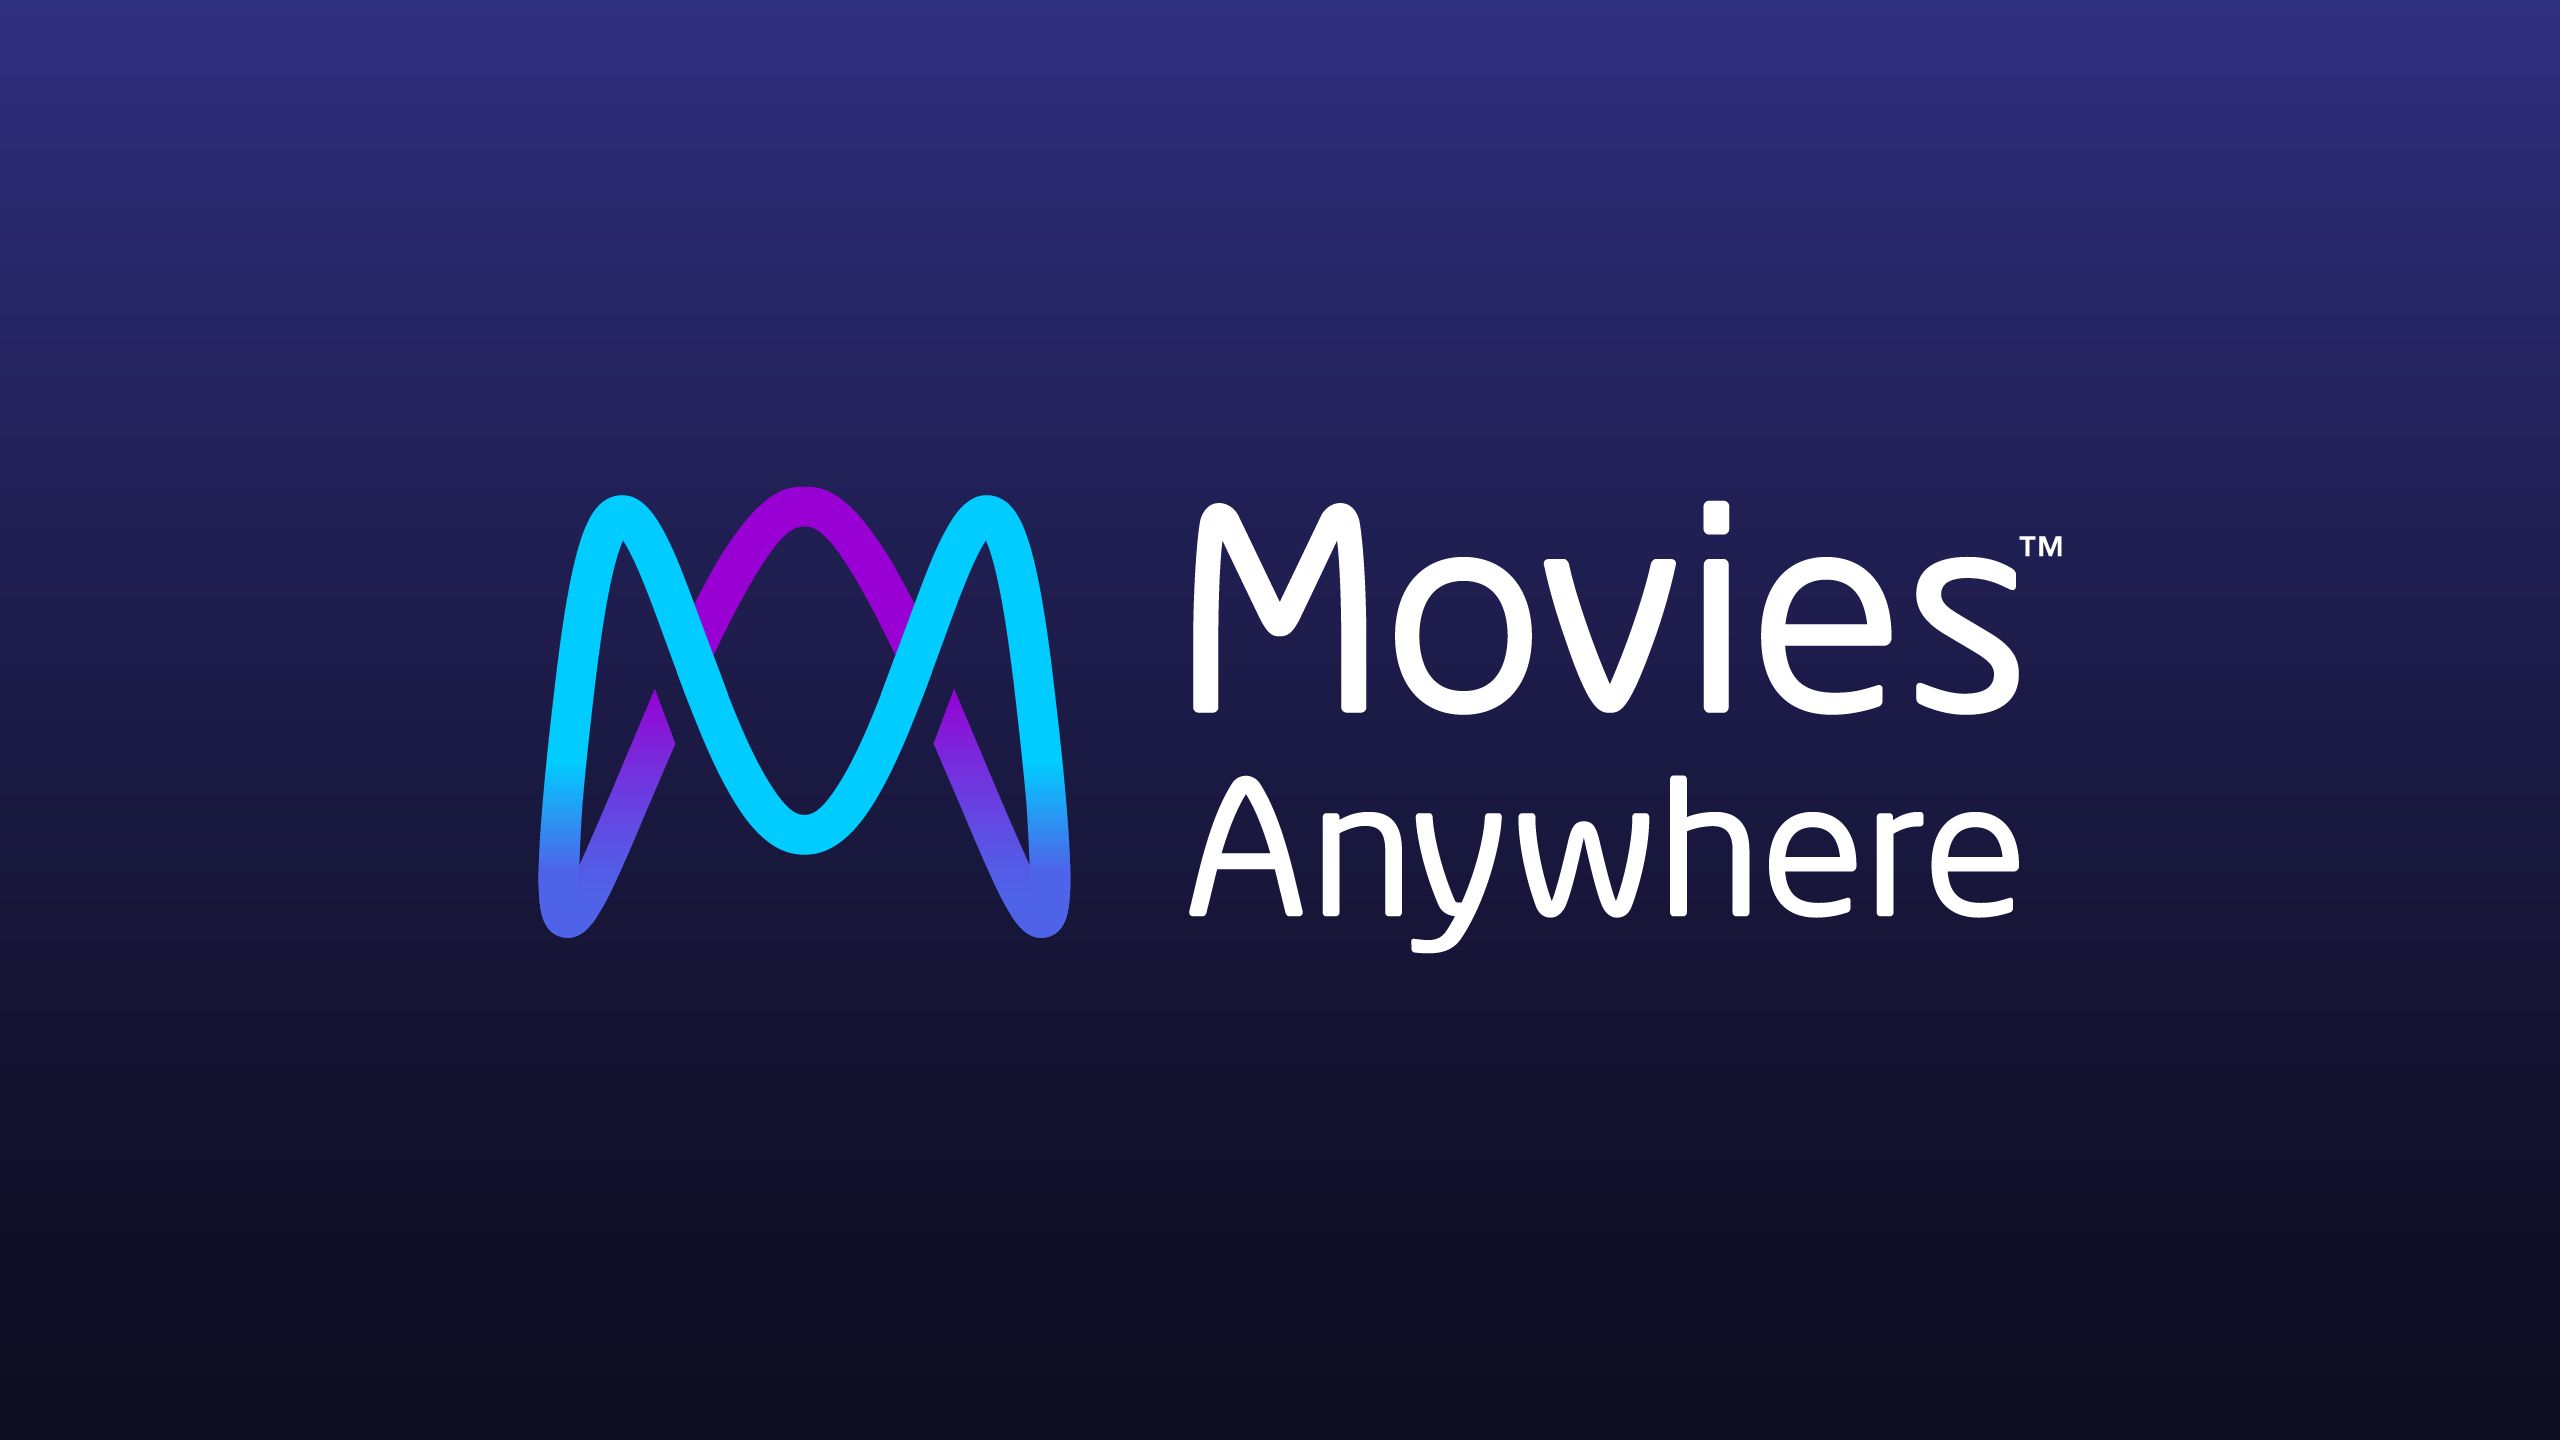 Movies Anywhere-Netflix Alternatives That are Free to watch Movies (*Free*)